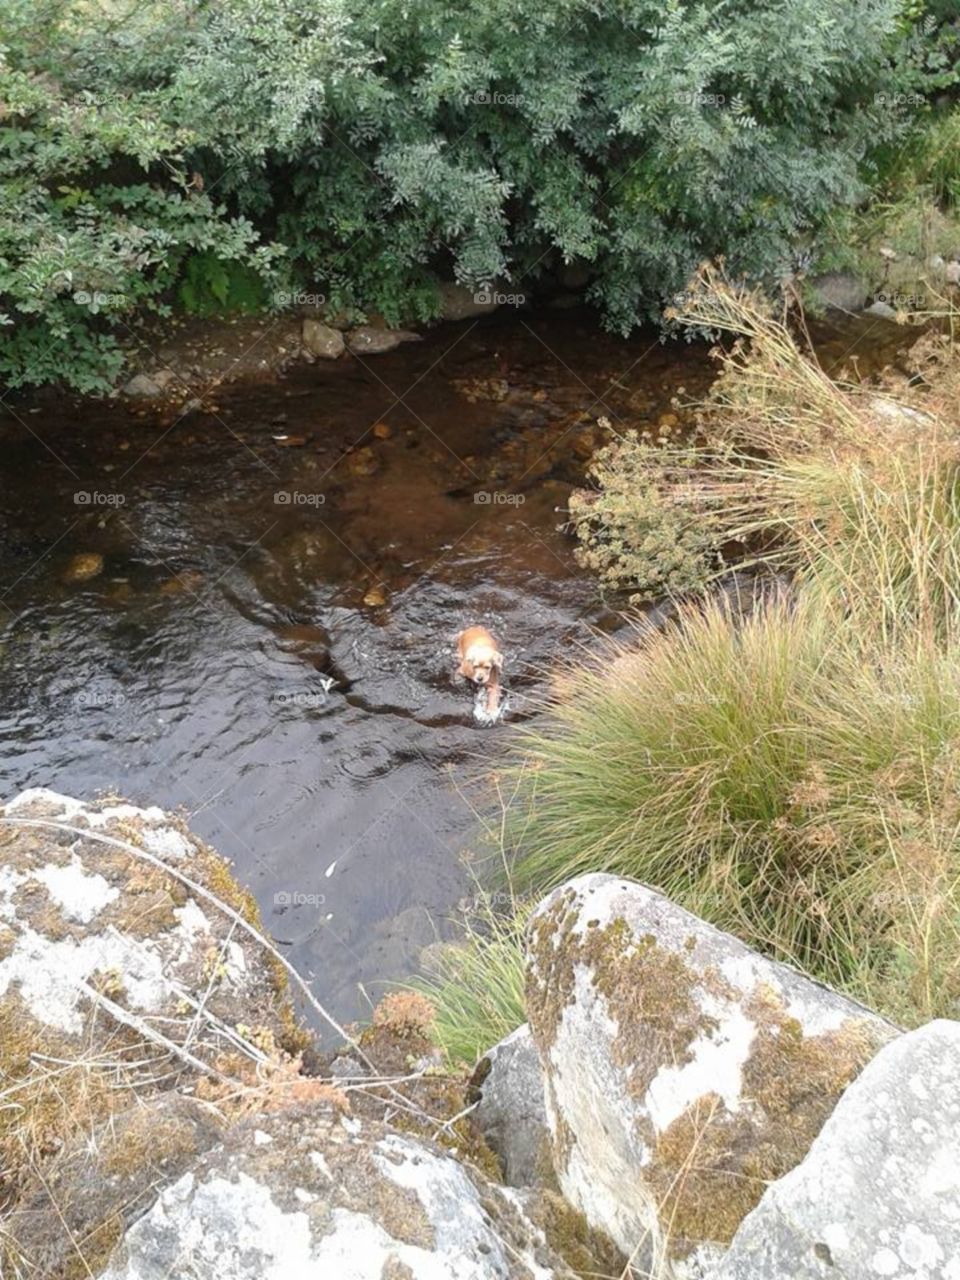 There's a dog in the river